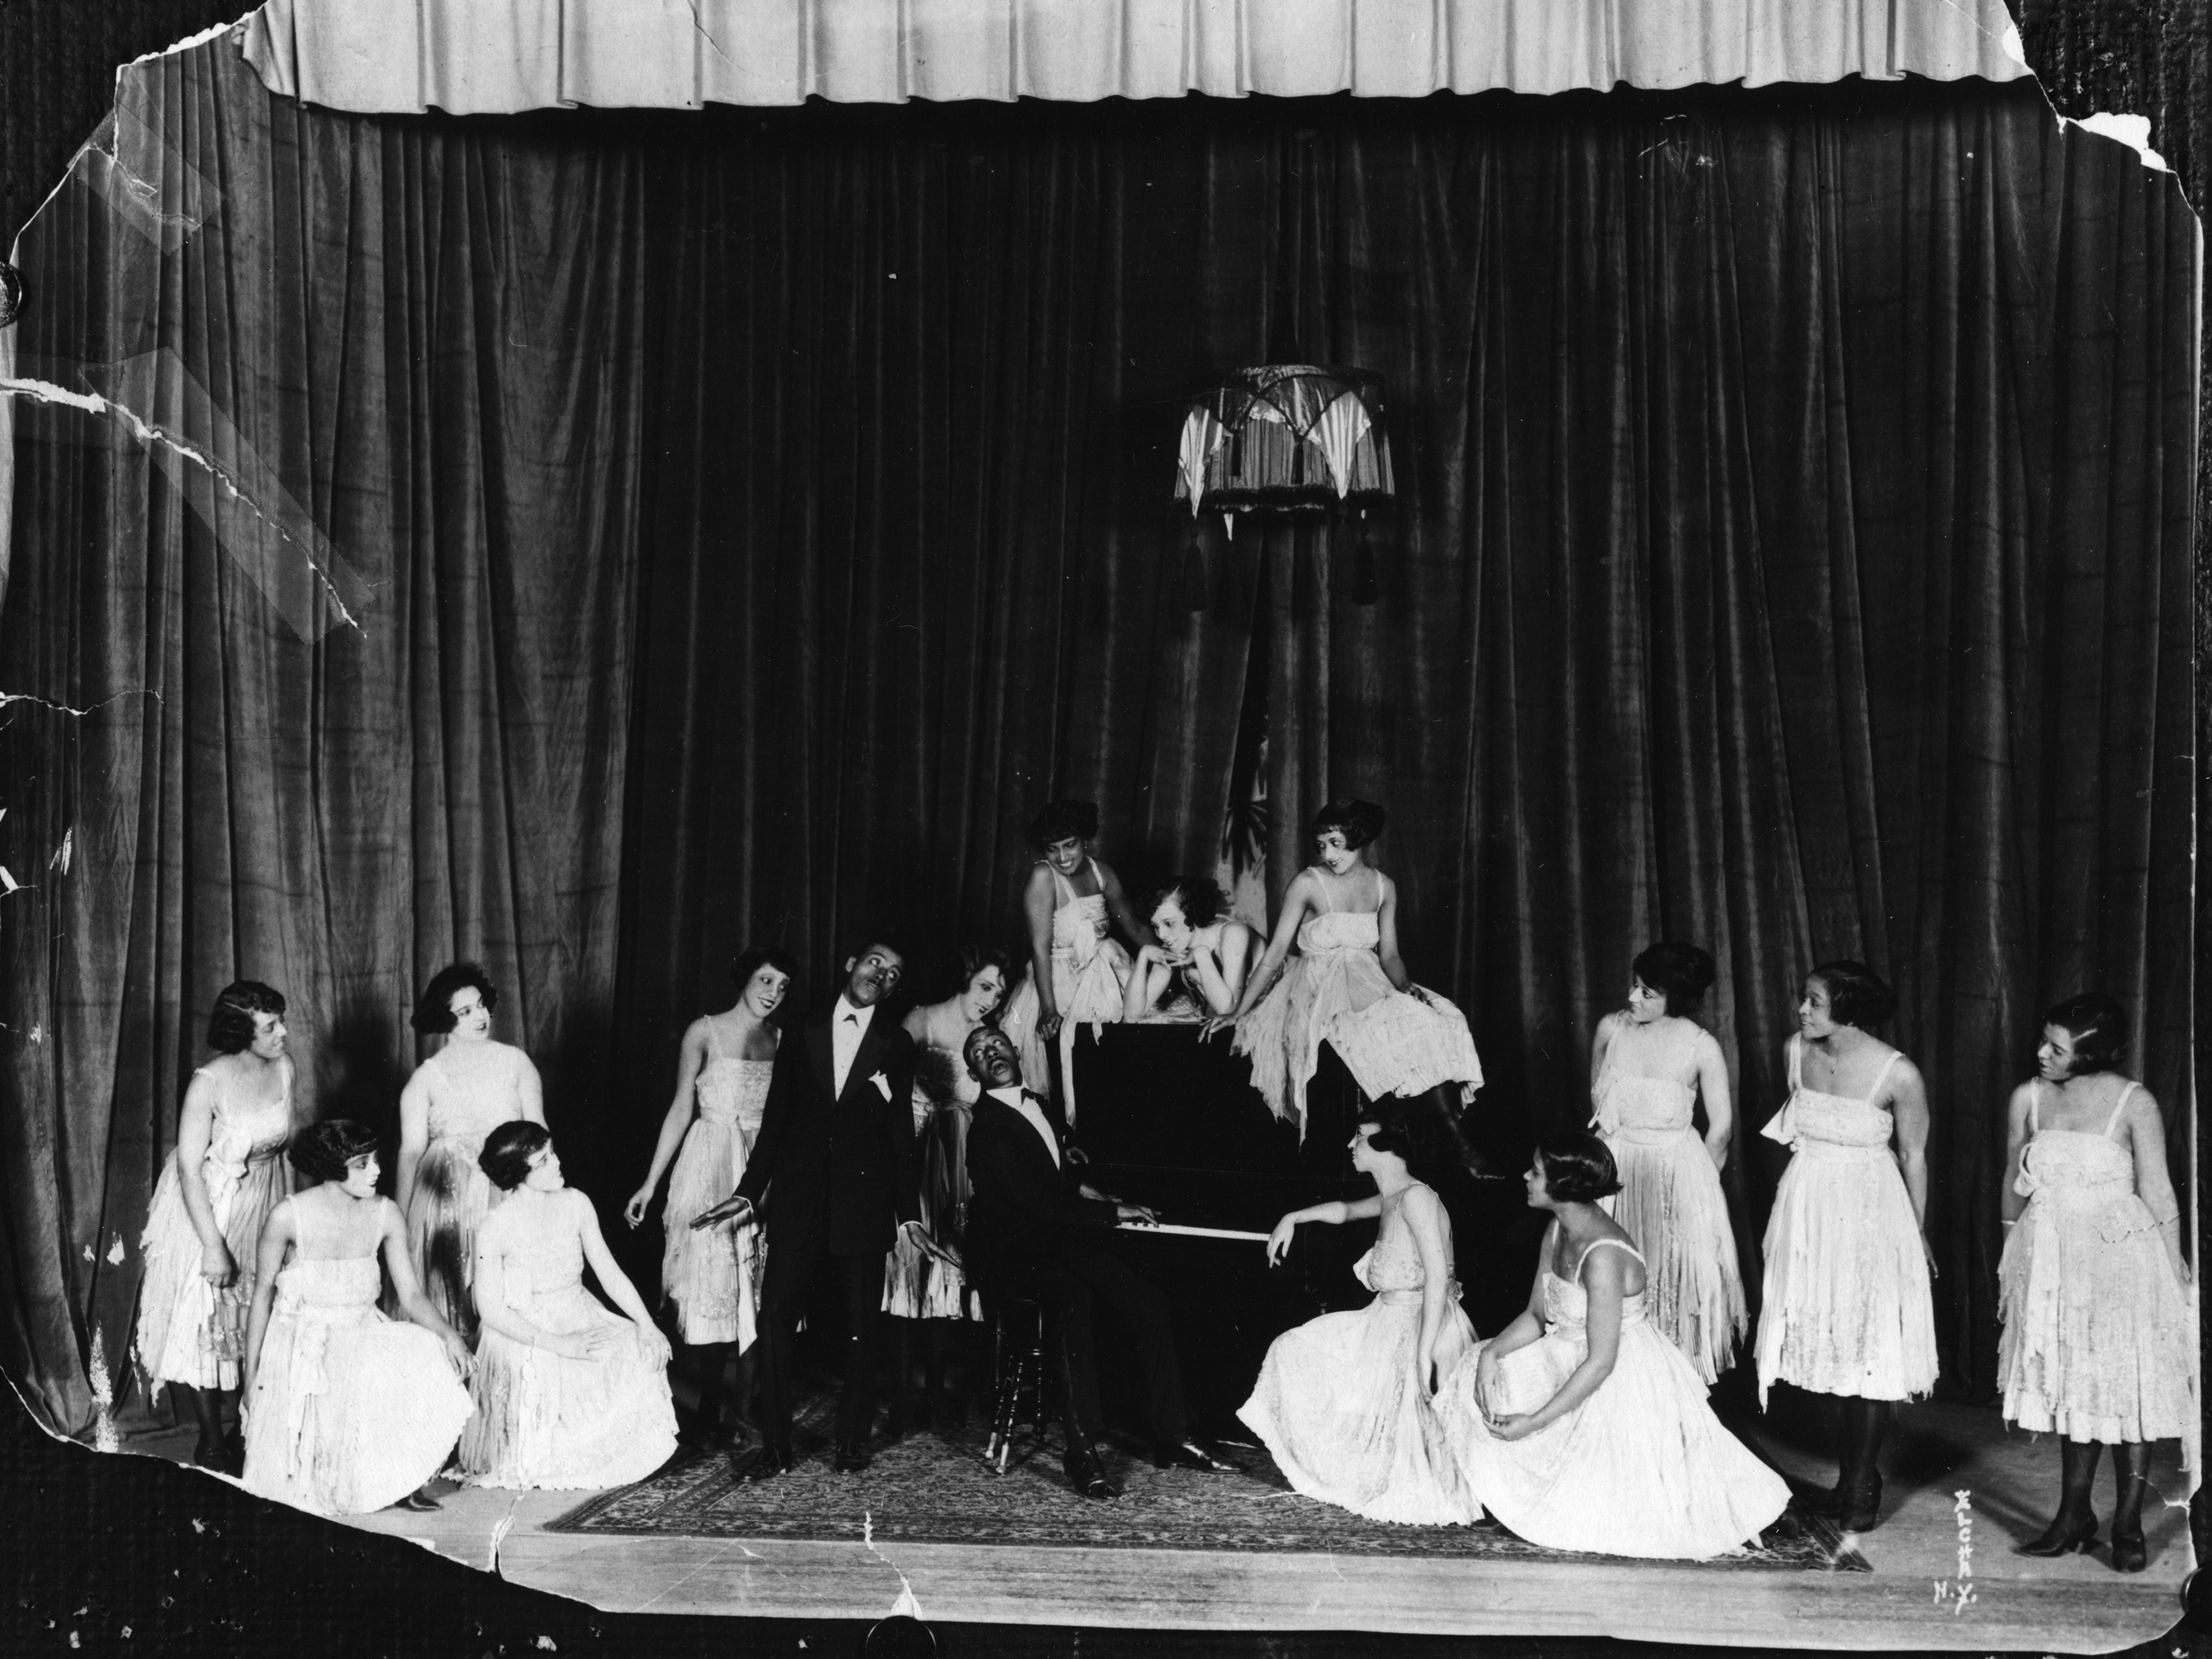 American composers and musicians Noble Sissle, center left, and Eubie Blake, on piano, perform with a group of women on stage in the early 20th century. Sissle and Blake wrote the score for Shuffle Along. Anthony Barboza/Getty Images